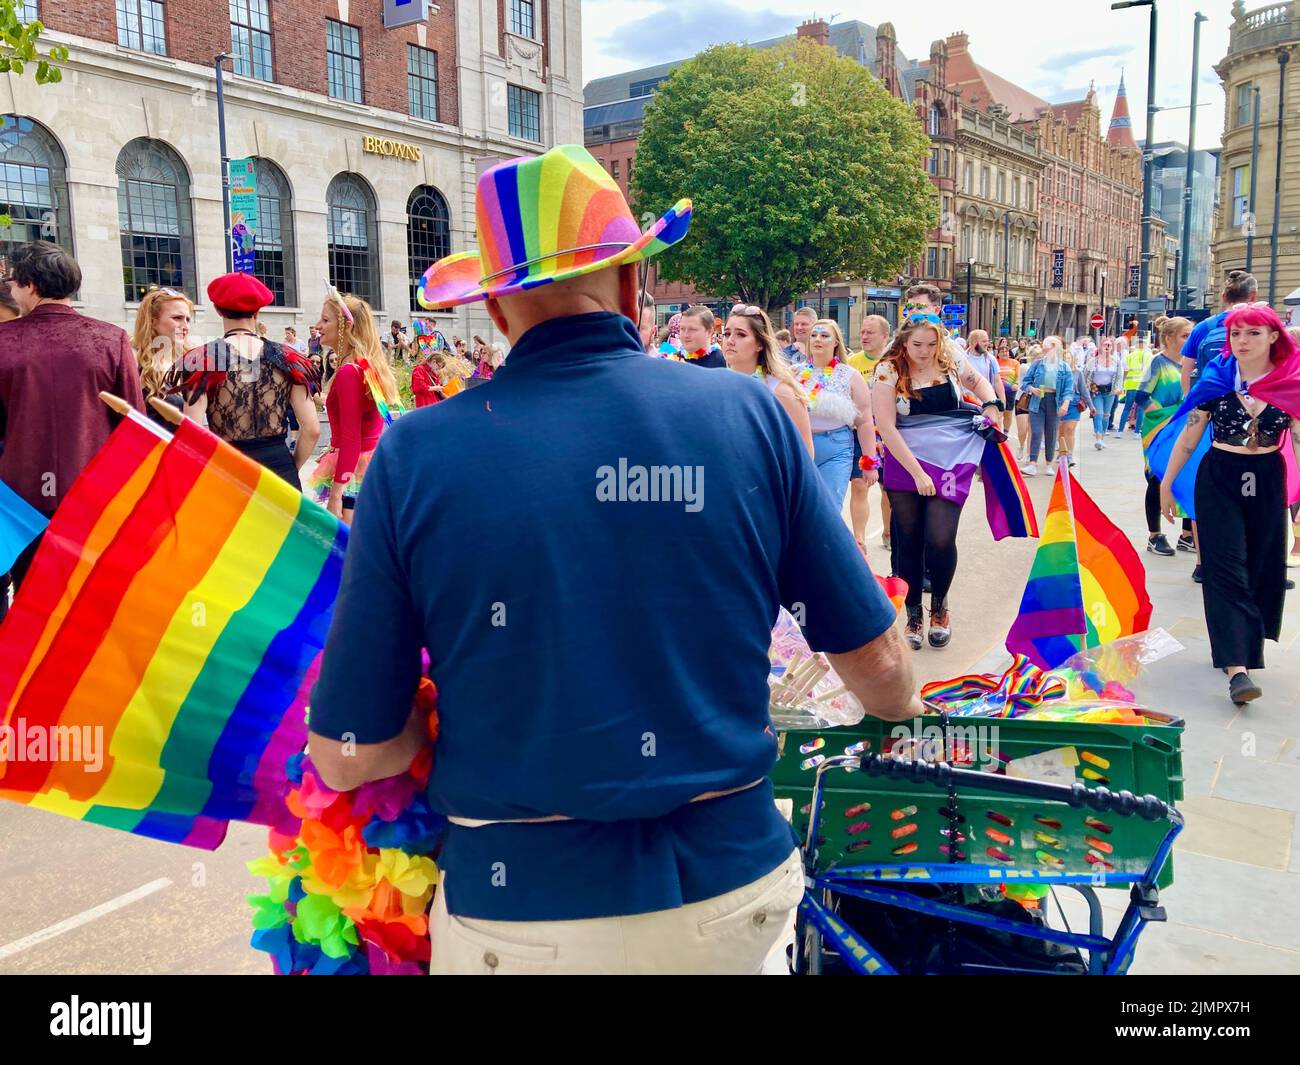 Leeds Pride 2022 celebrations as a crowd gather at Millenium Square for the beginniLeng of the parade. Celebrating gay people & wider LGBTQ community. Stock Photo